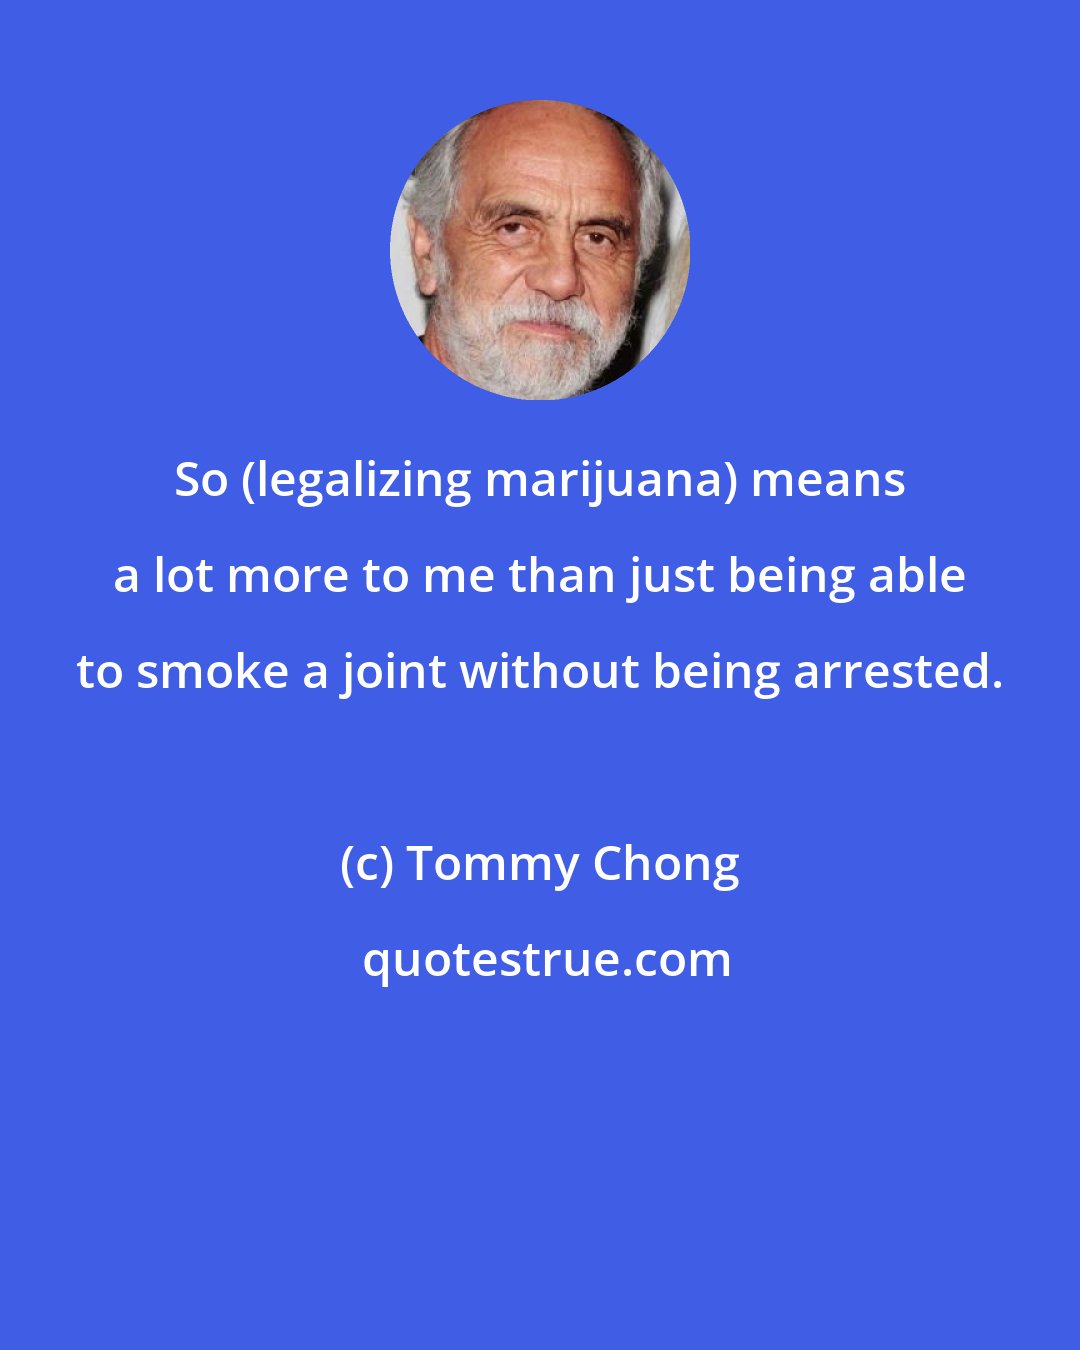 Tommy Chong: So (legalizing marijuana) means a lot more to me than just being able to smoke a joint without being arrested.